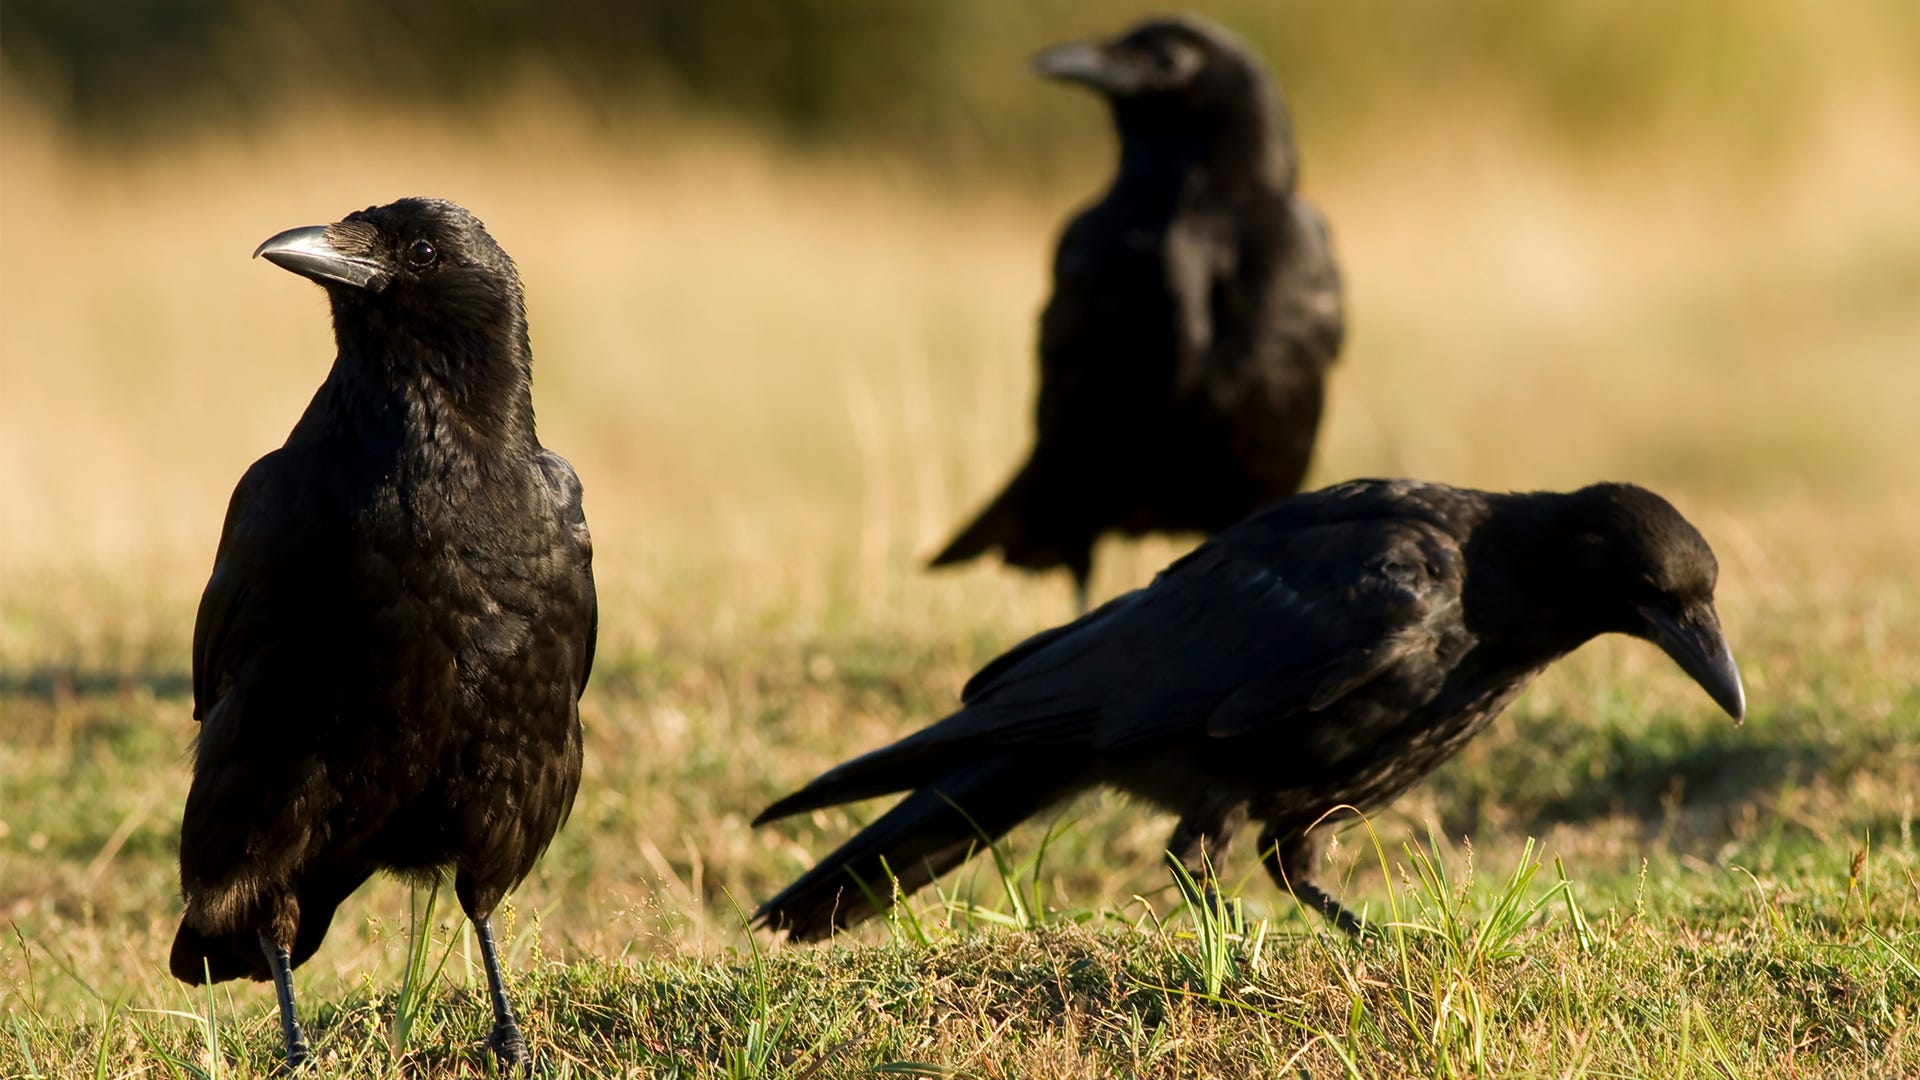 American Crows - The Good, The Bad and The Noisy